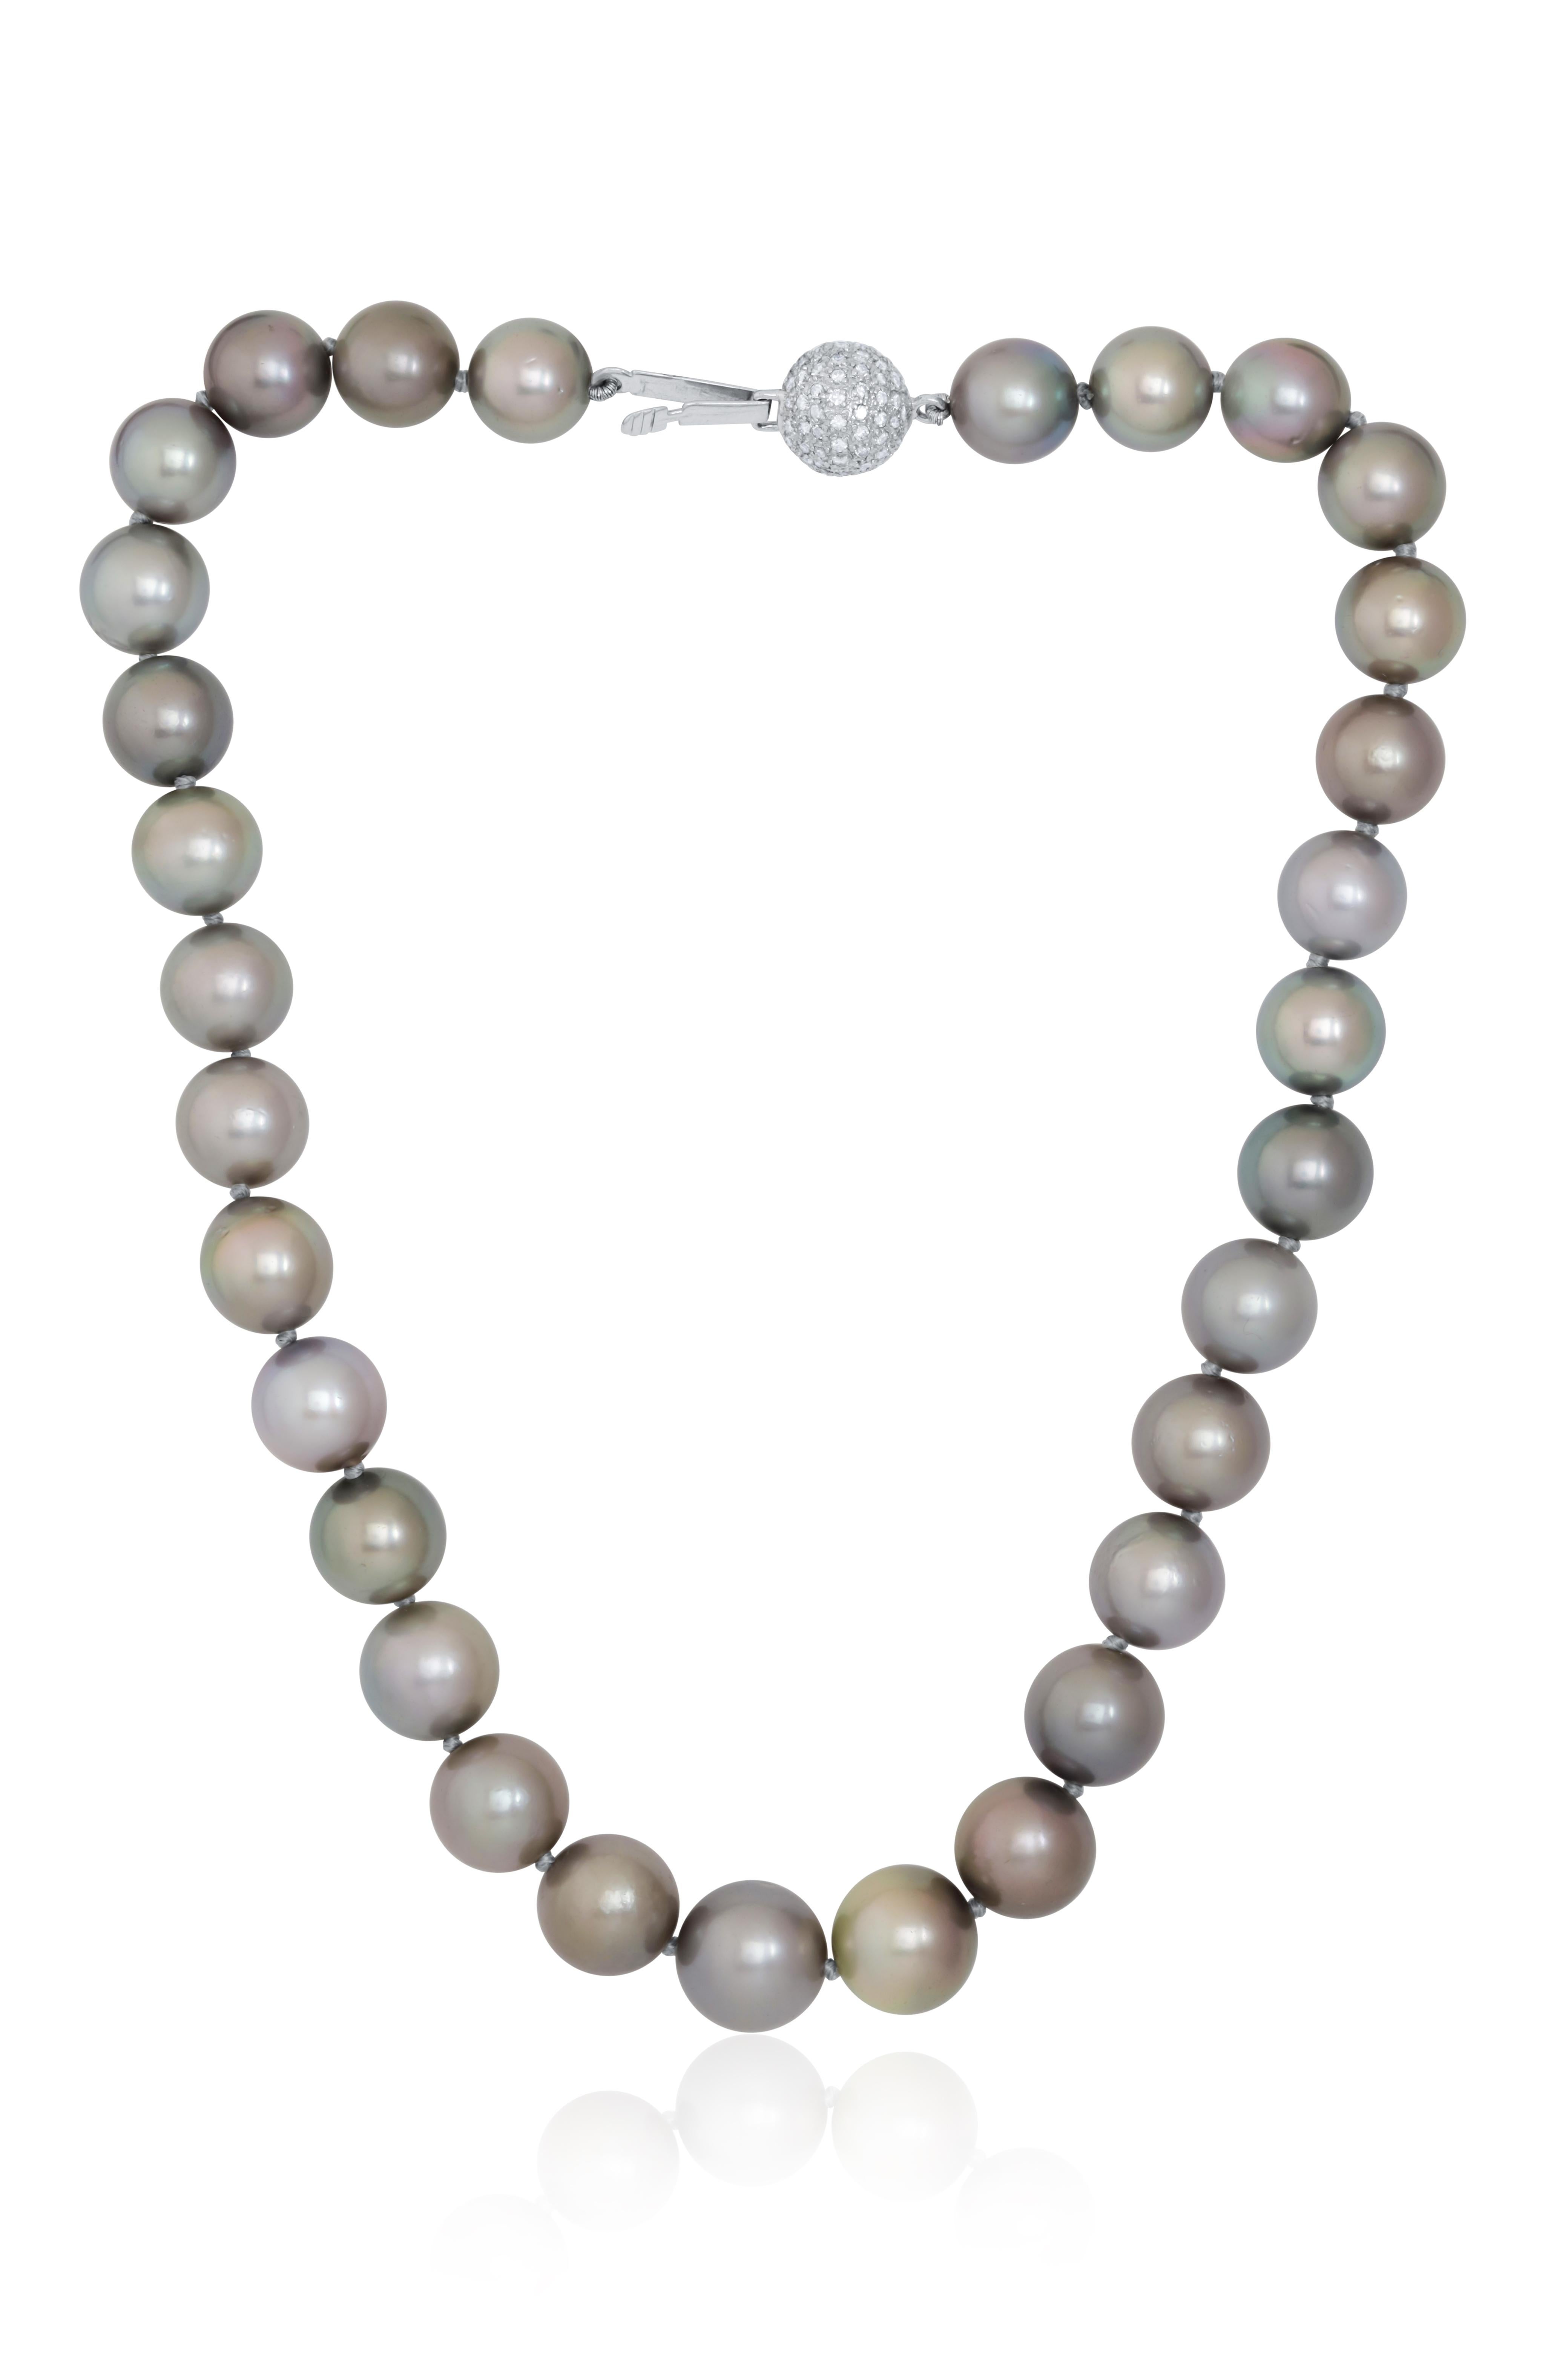 Brilliant Cut Diana M. 18 kt white gold pearl necklace adorned with black pearls and clip For Sale